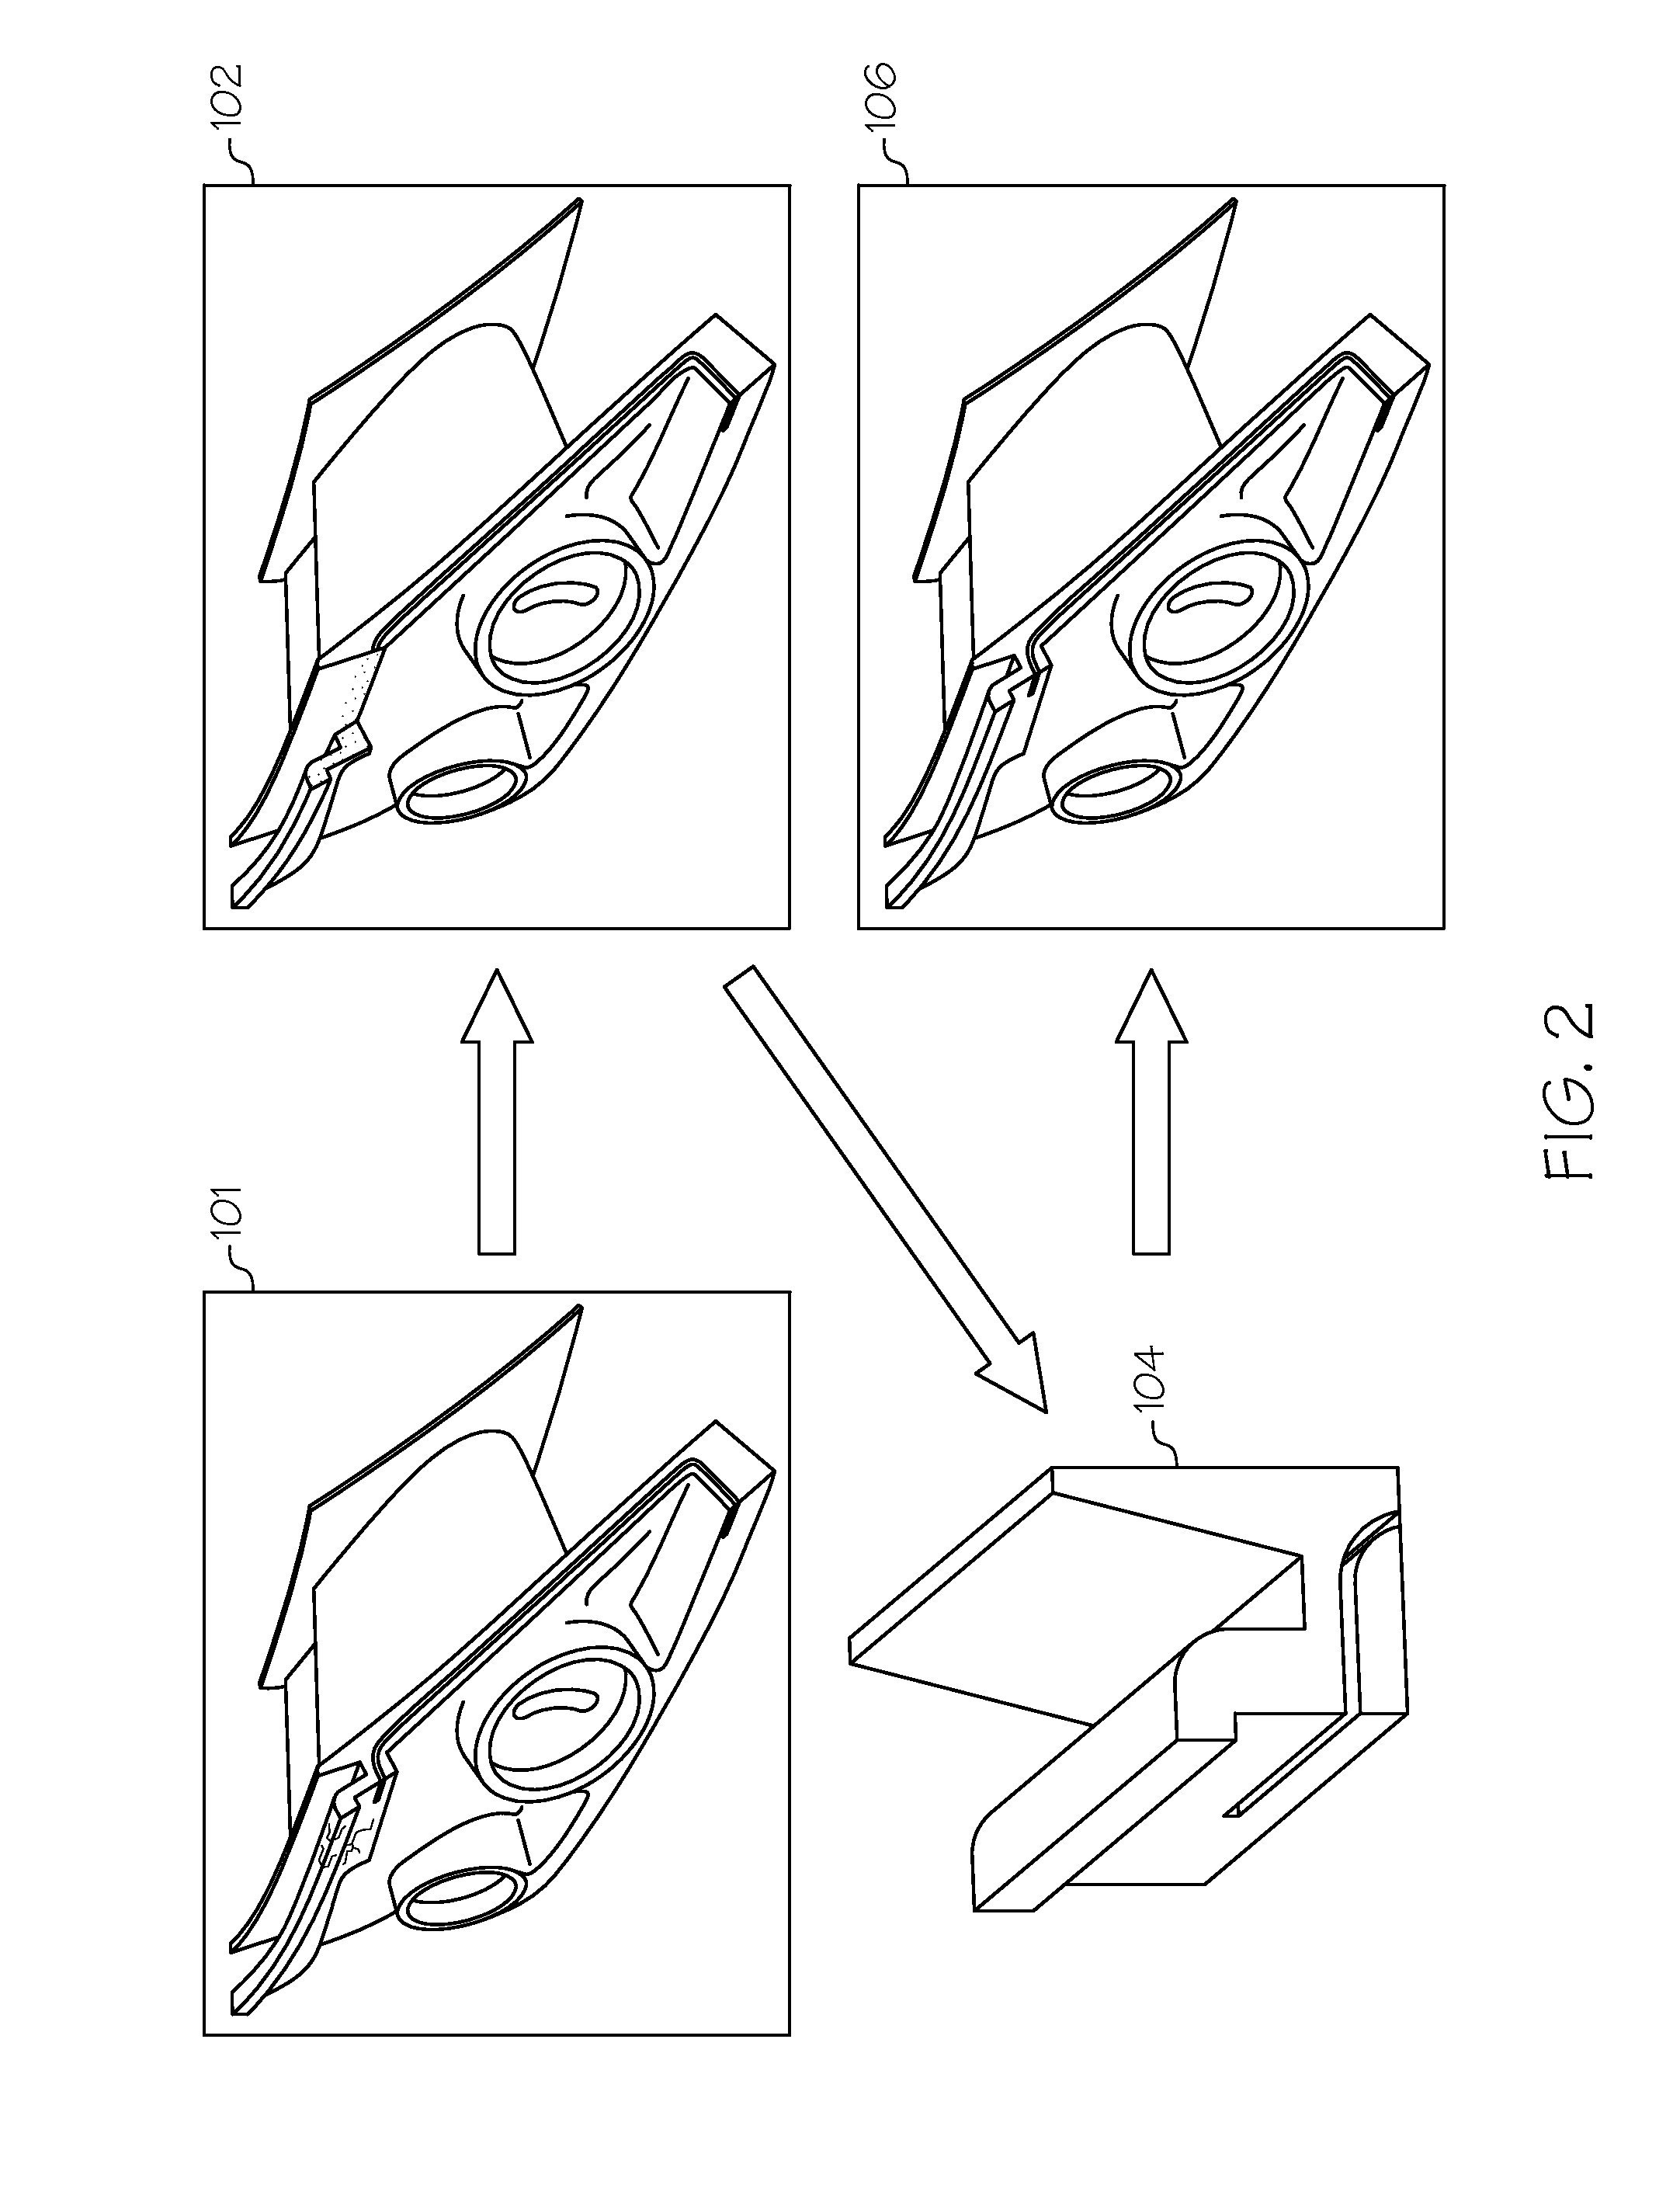 Methods for the repair of gas turbine engine components using additive manufacturing techniques